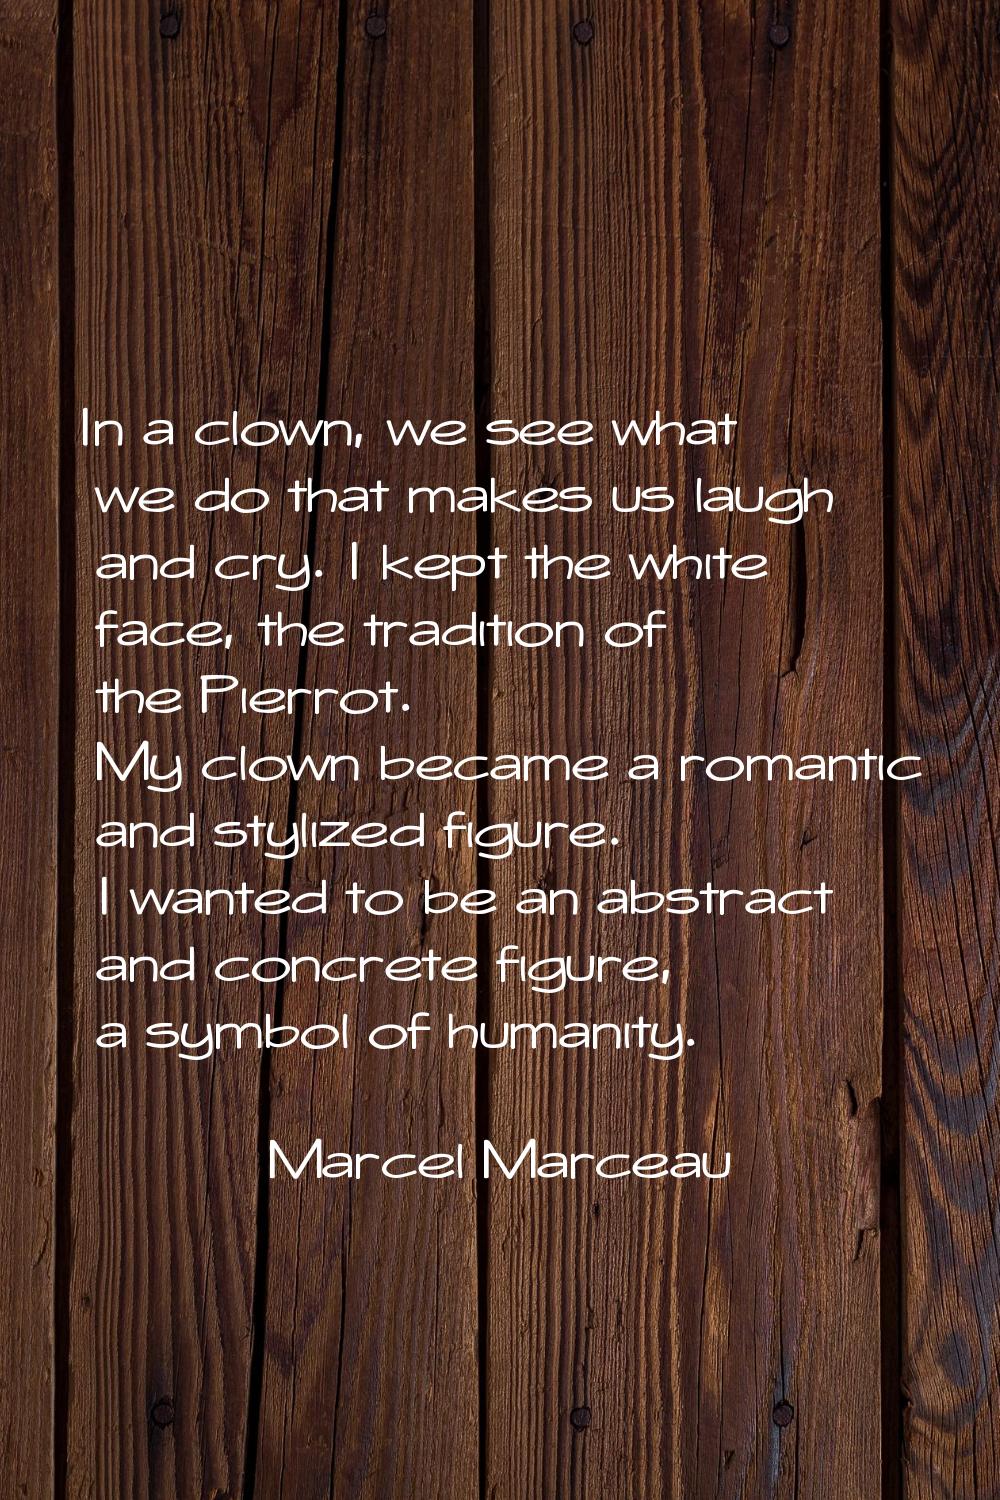 In a clown, we see what we do that makes us laugh and cry. I kept the white face, the tradition of 